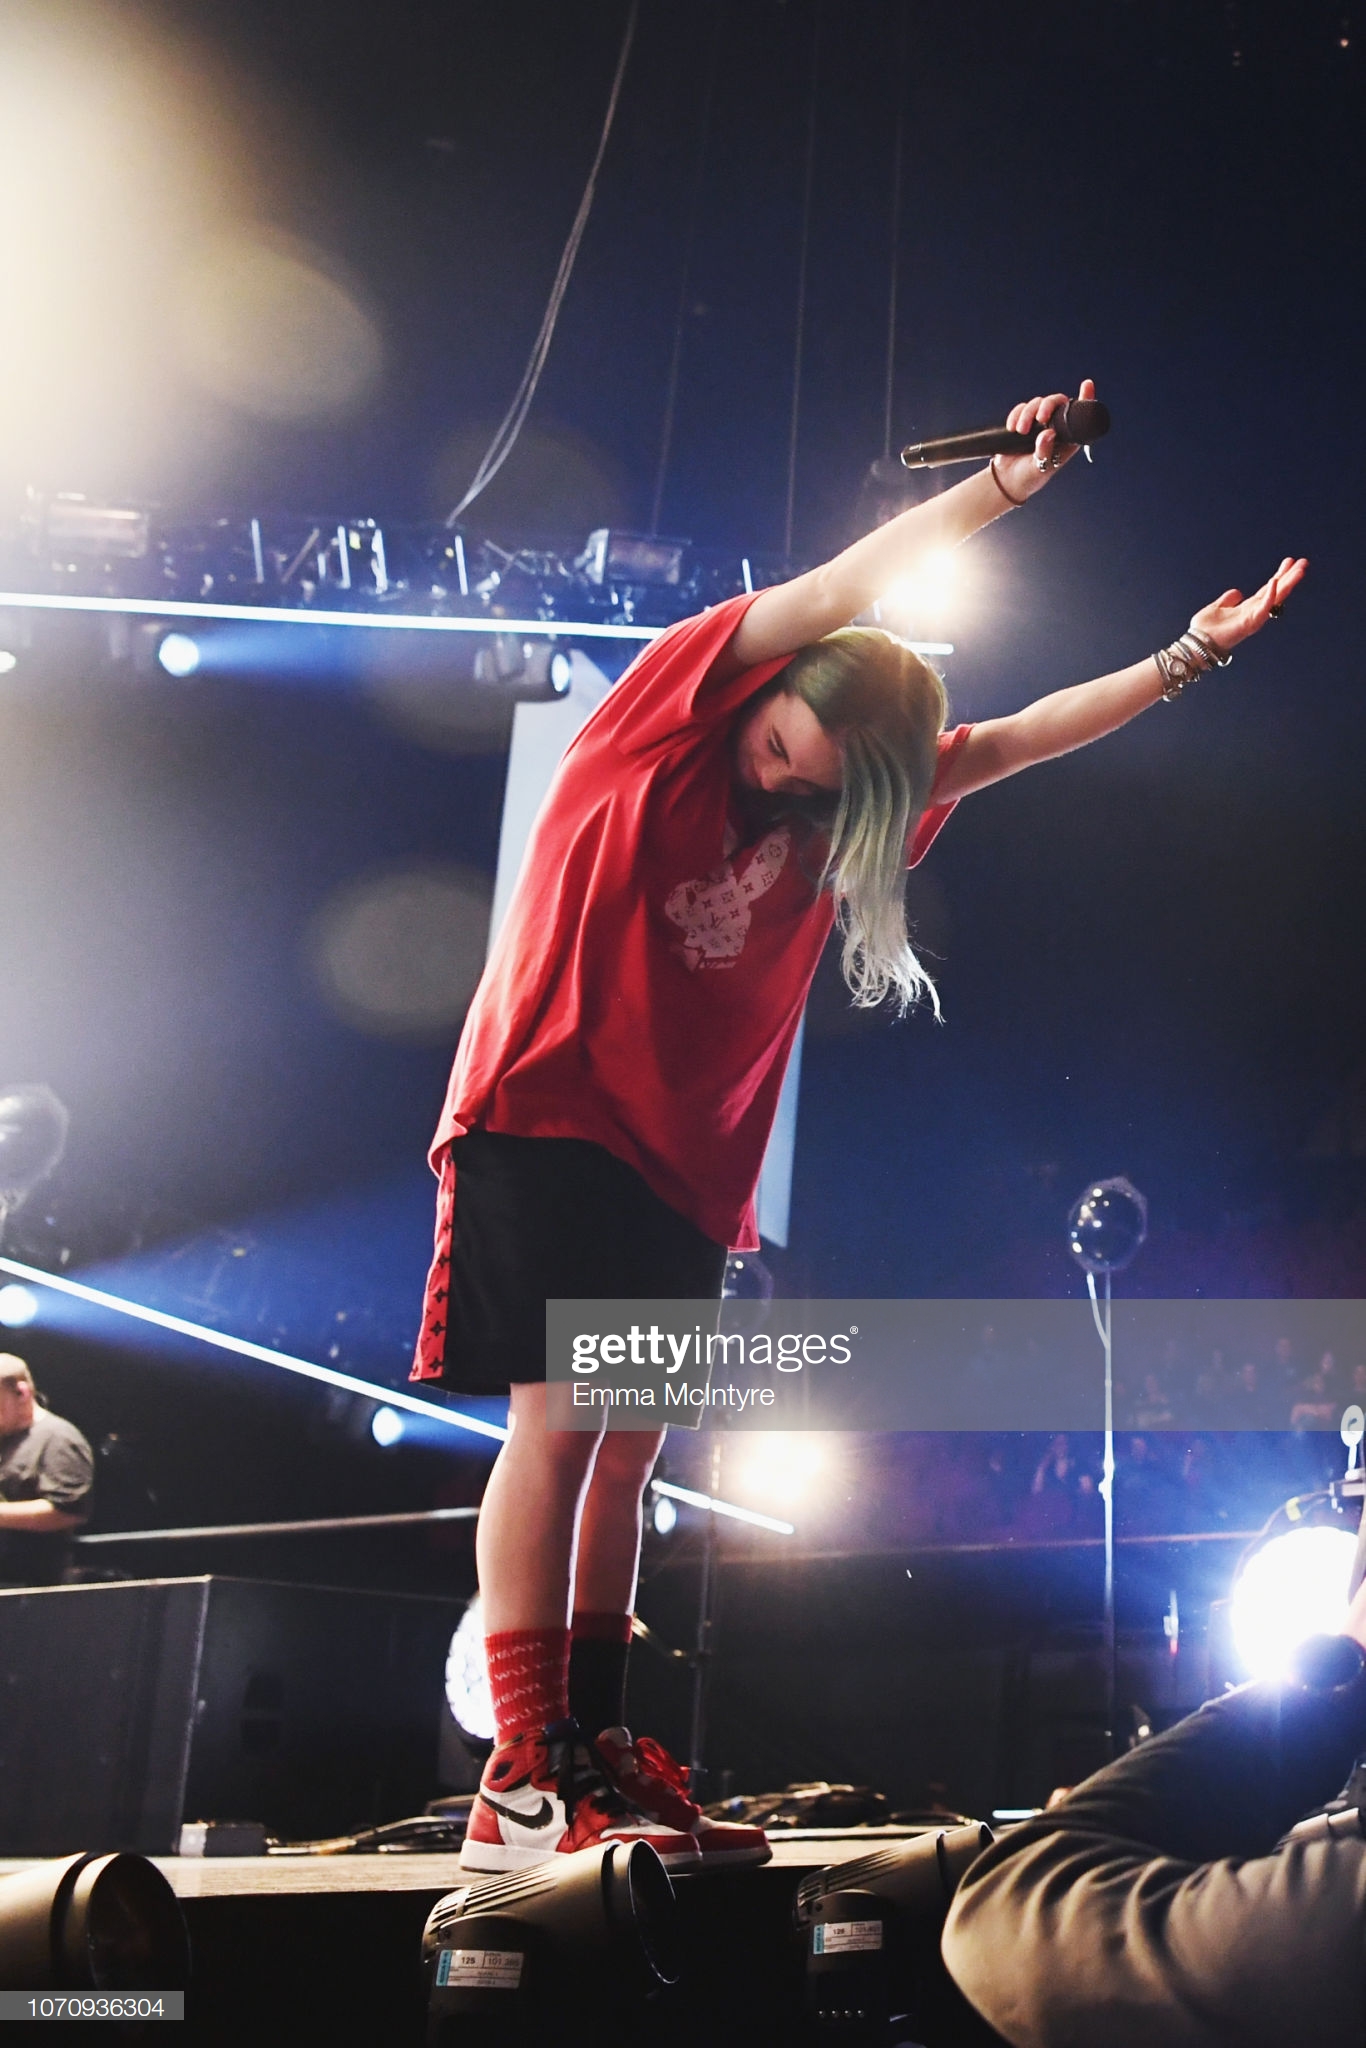 gettyimages-1070936304-2048x2048.jpg